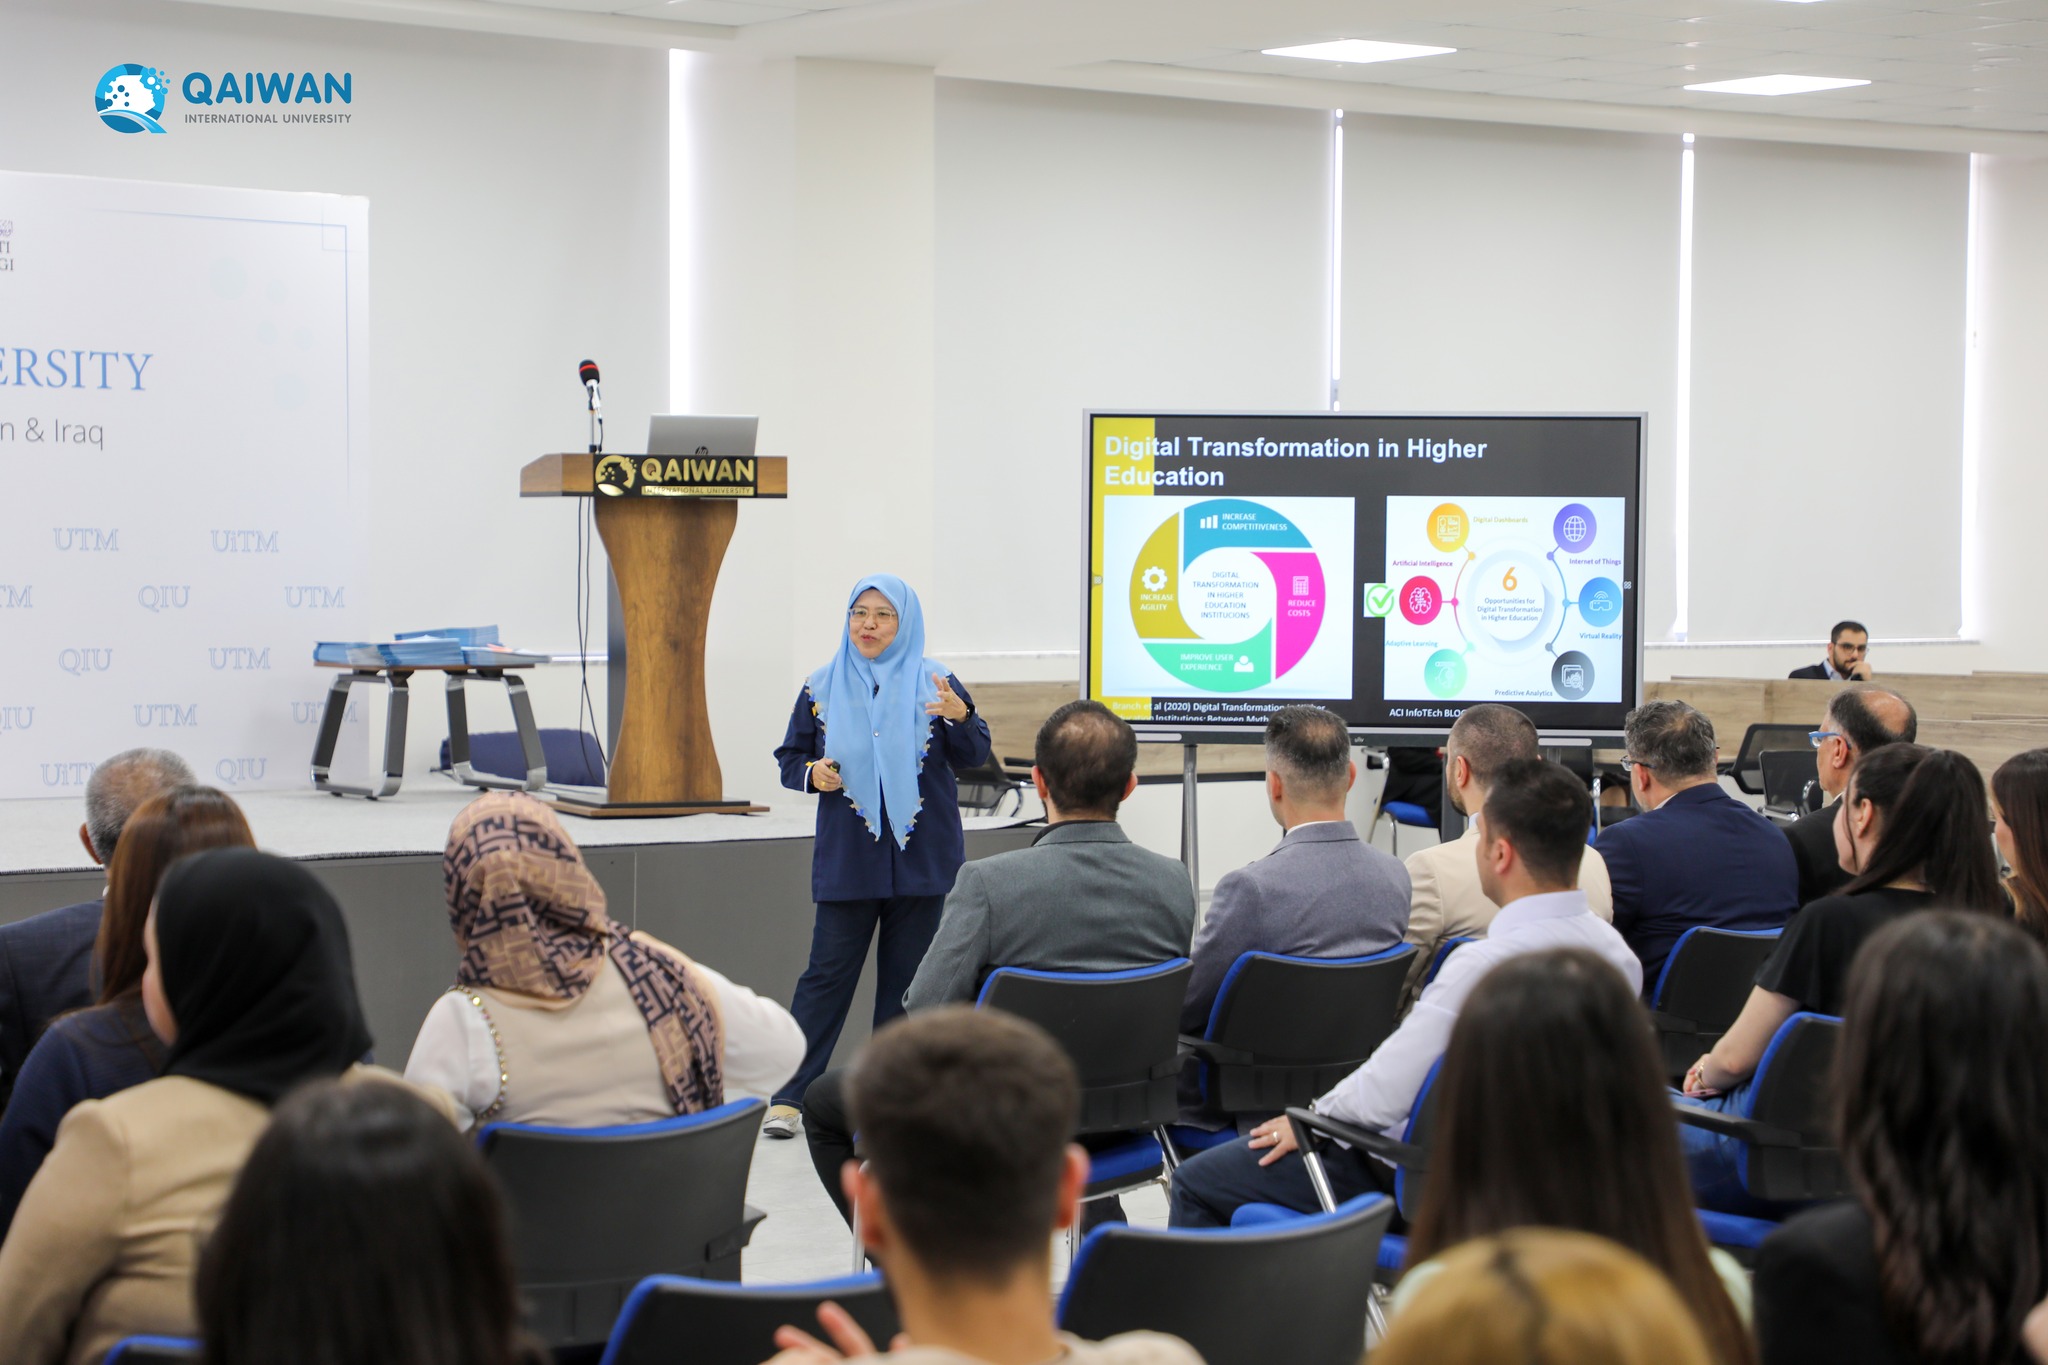 A seminar on the use of AI in education was presented by Prof. Ts Dr. Haryani Haron